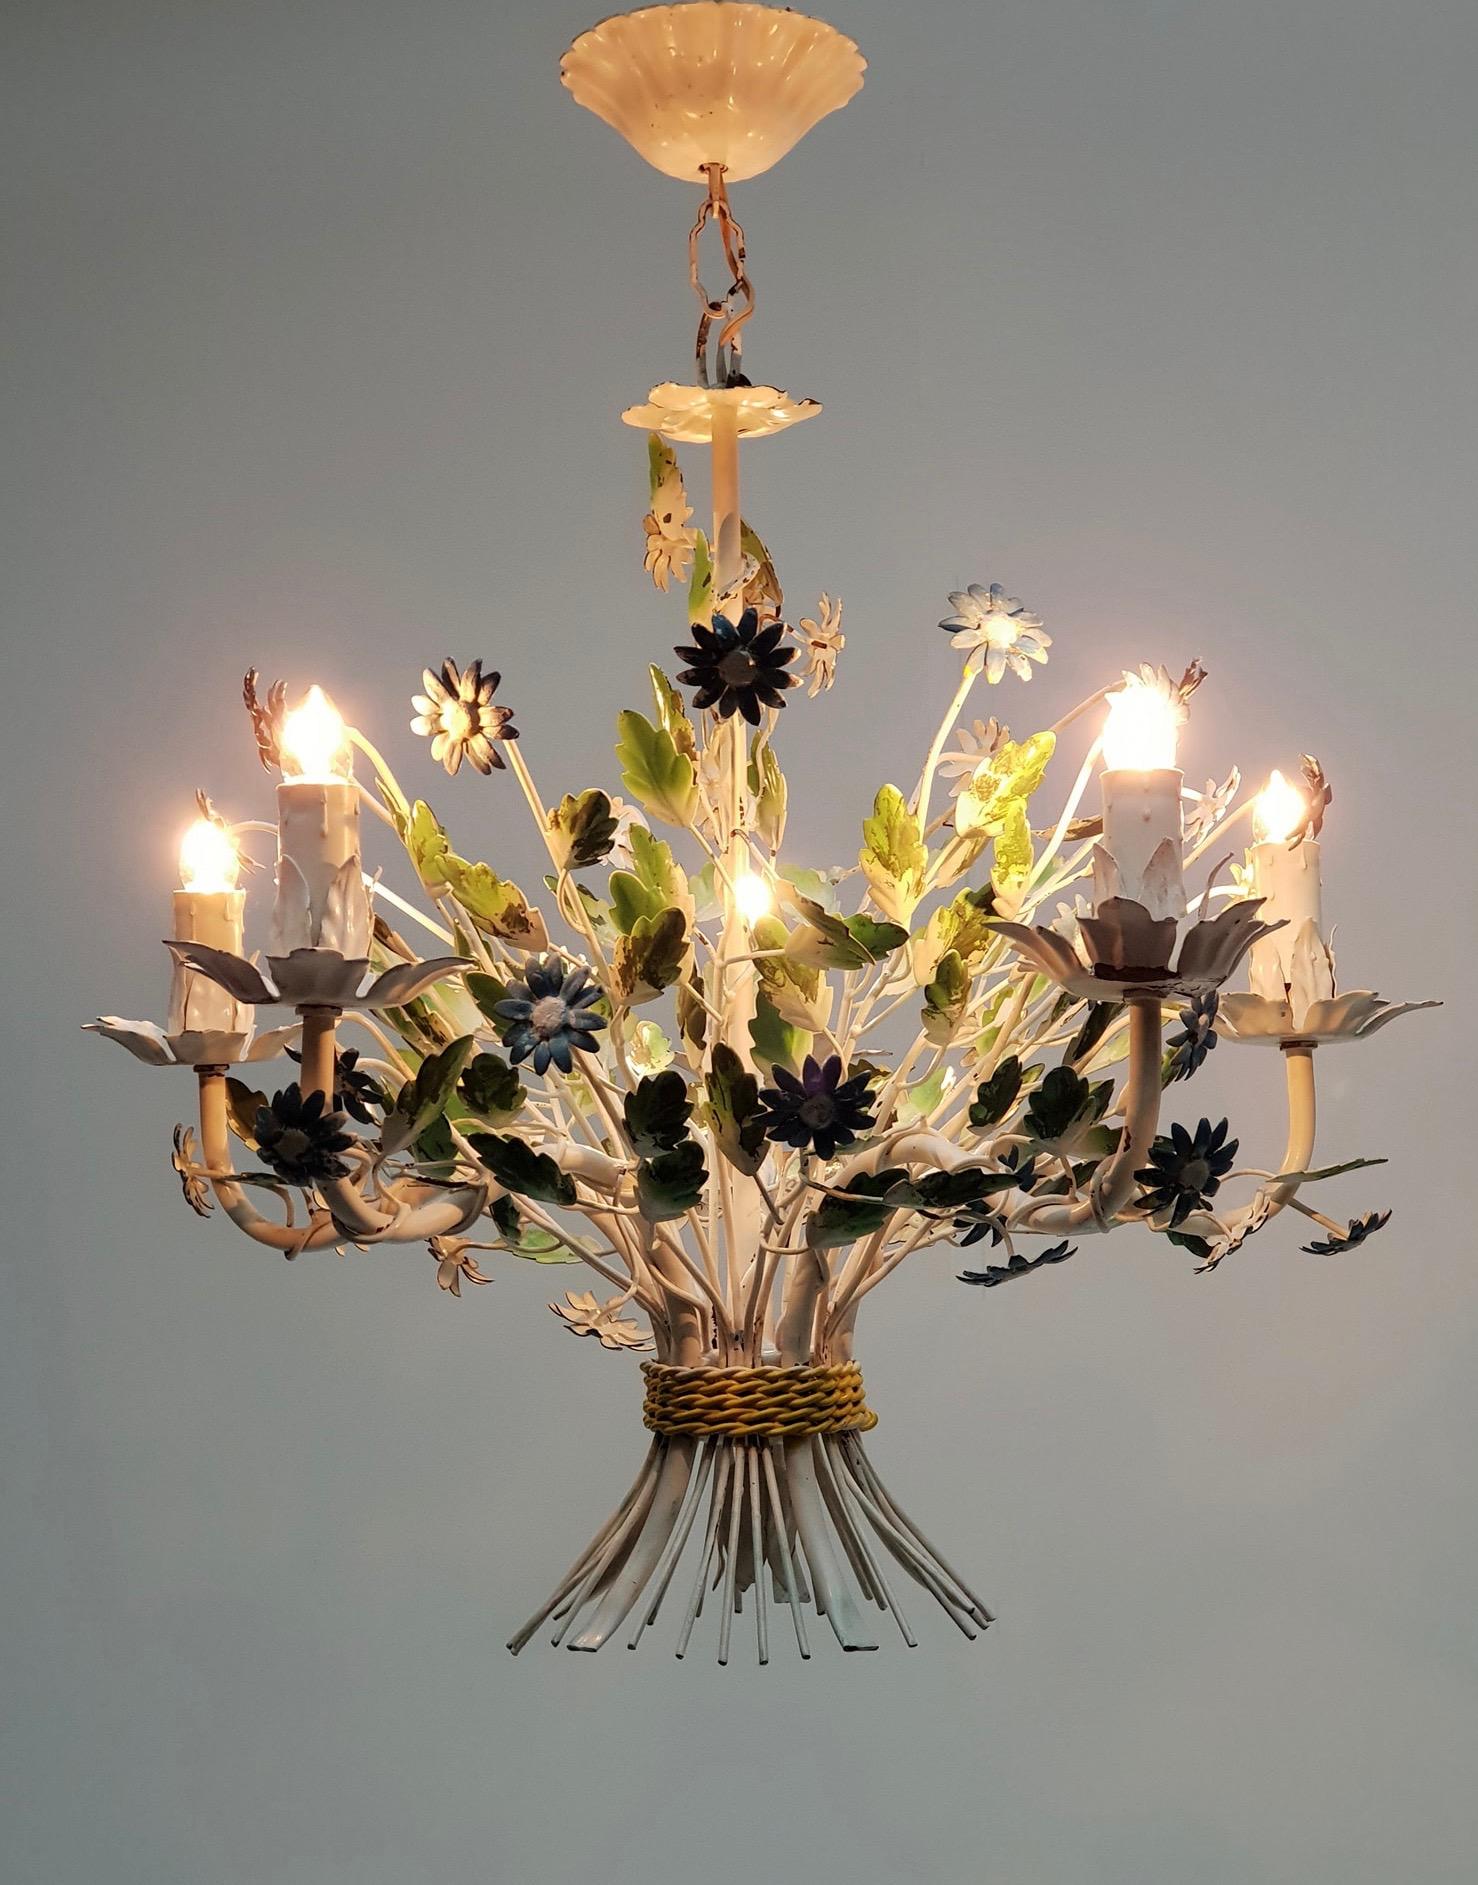 This elegant, midcentury chandelier was crafted in France, circa 1960. The charming hanging light fixture has five lights and is embellished with realistic blue flowers and green leaves. The round chandelier is in good vintage condition and has its